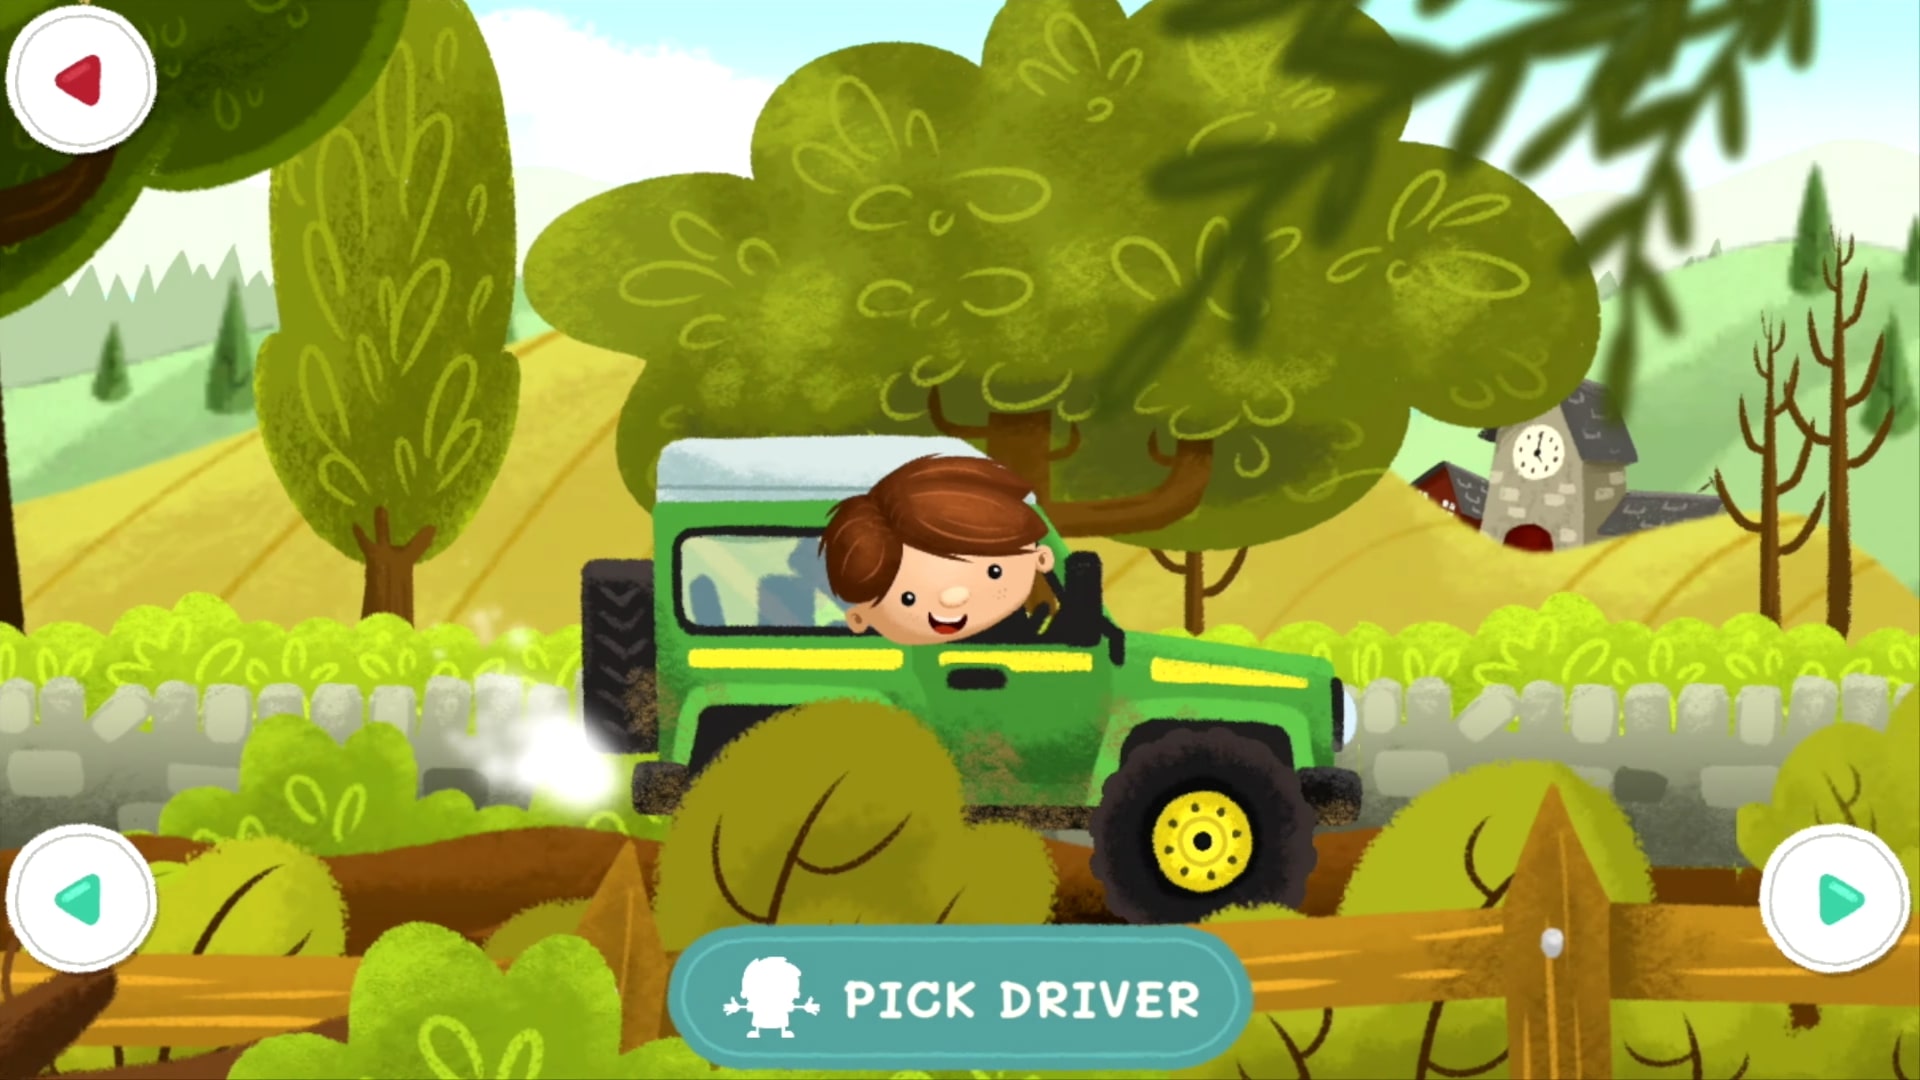 Introducing "Farming Simulator Kids": A New Virtual Adventure For Kids Is Now Available!